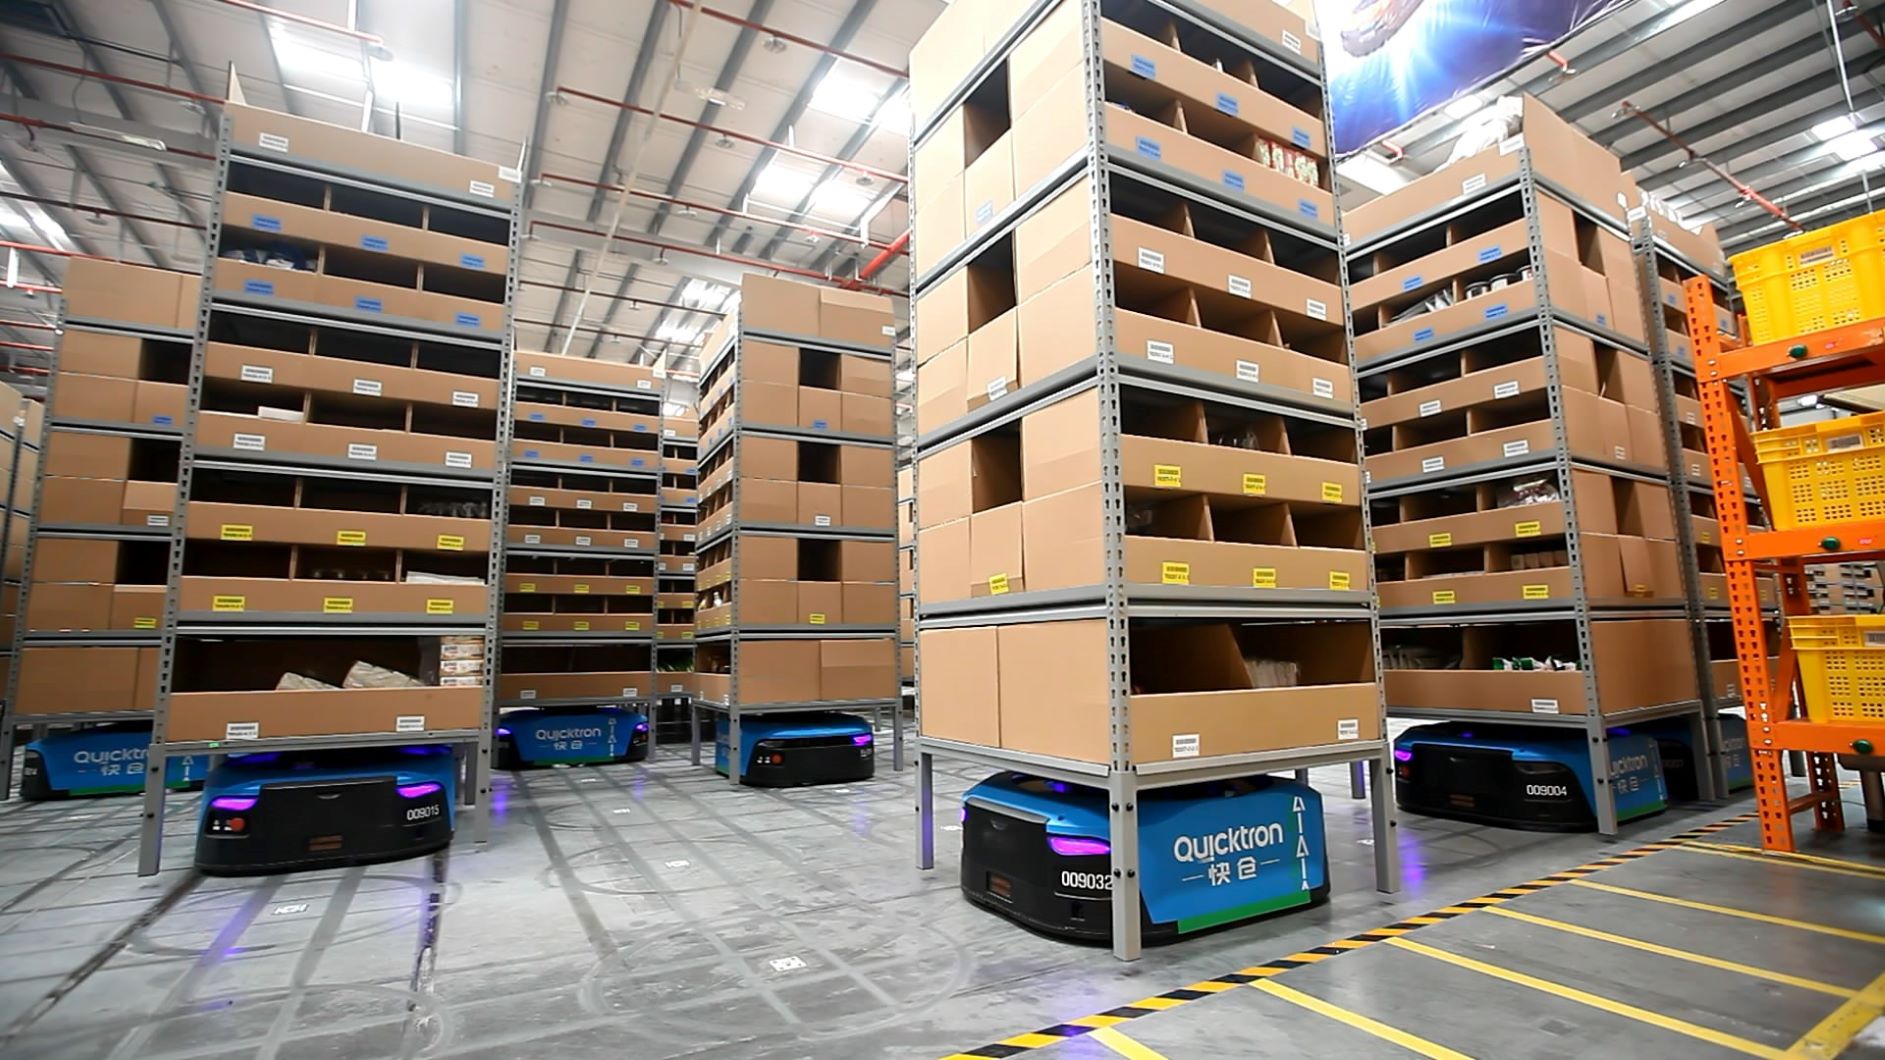 Small robots move bins of goods in an automated warehouse.